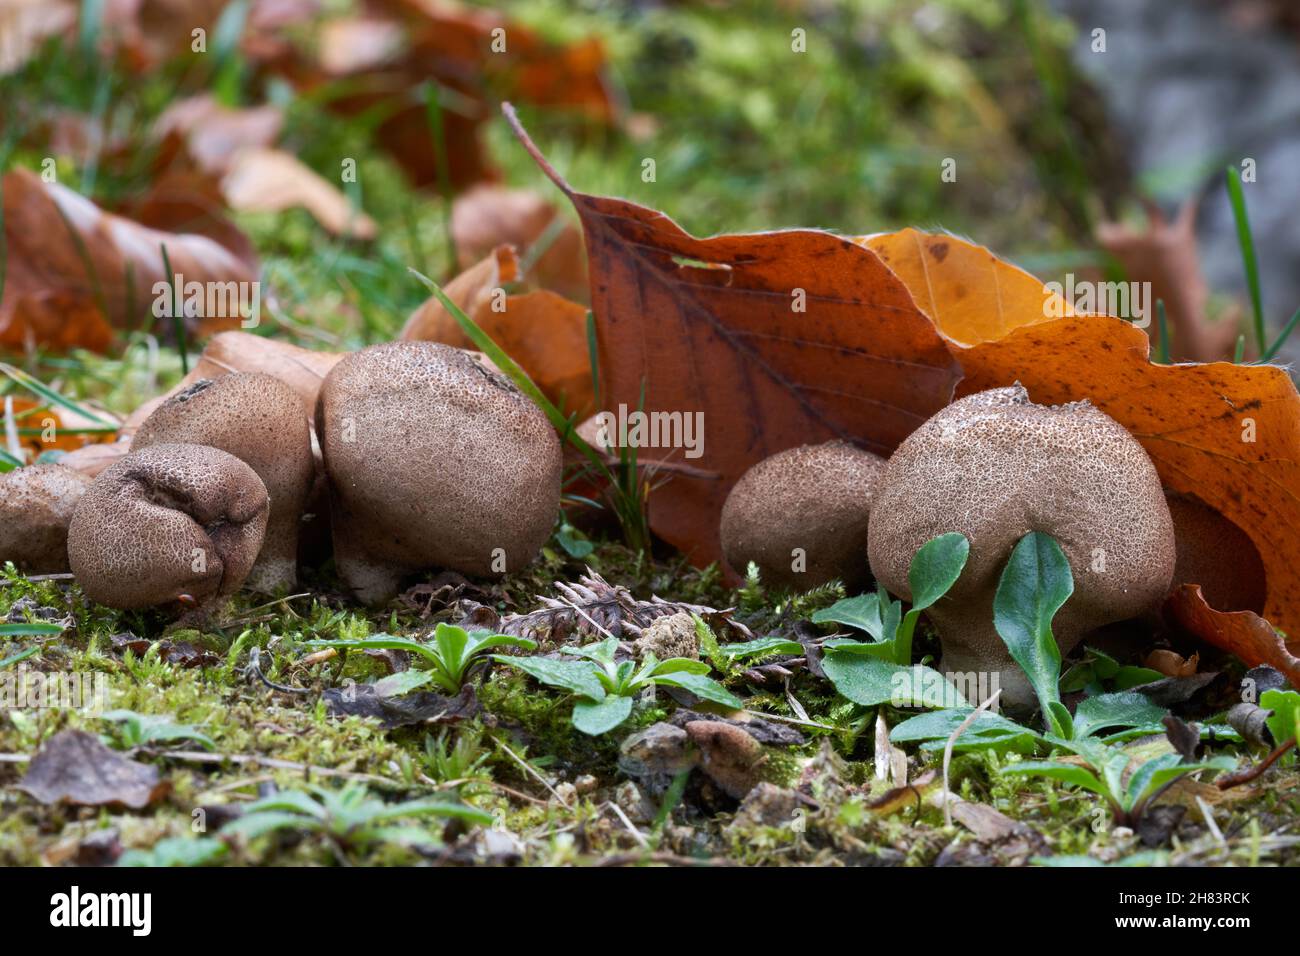 Edible mushroom Lycoperdon pyriforme in spruce forest. Known as pear-shaped puffball or stump puffball. Old wild mushrooms growing in the grass. Stock Photo